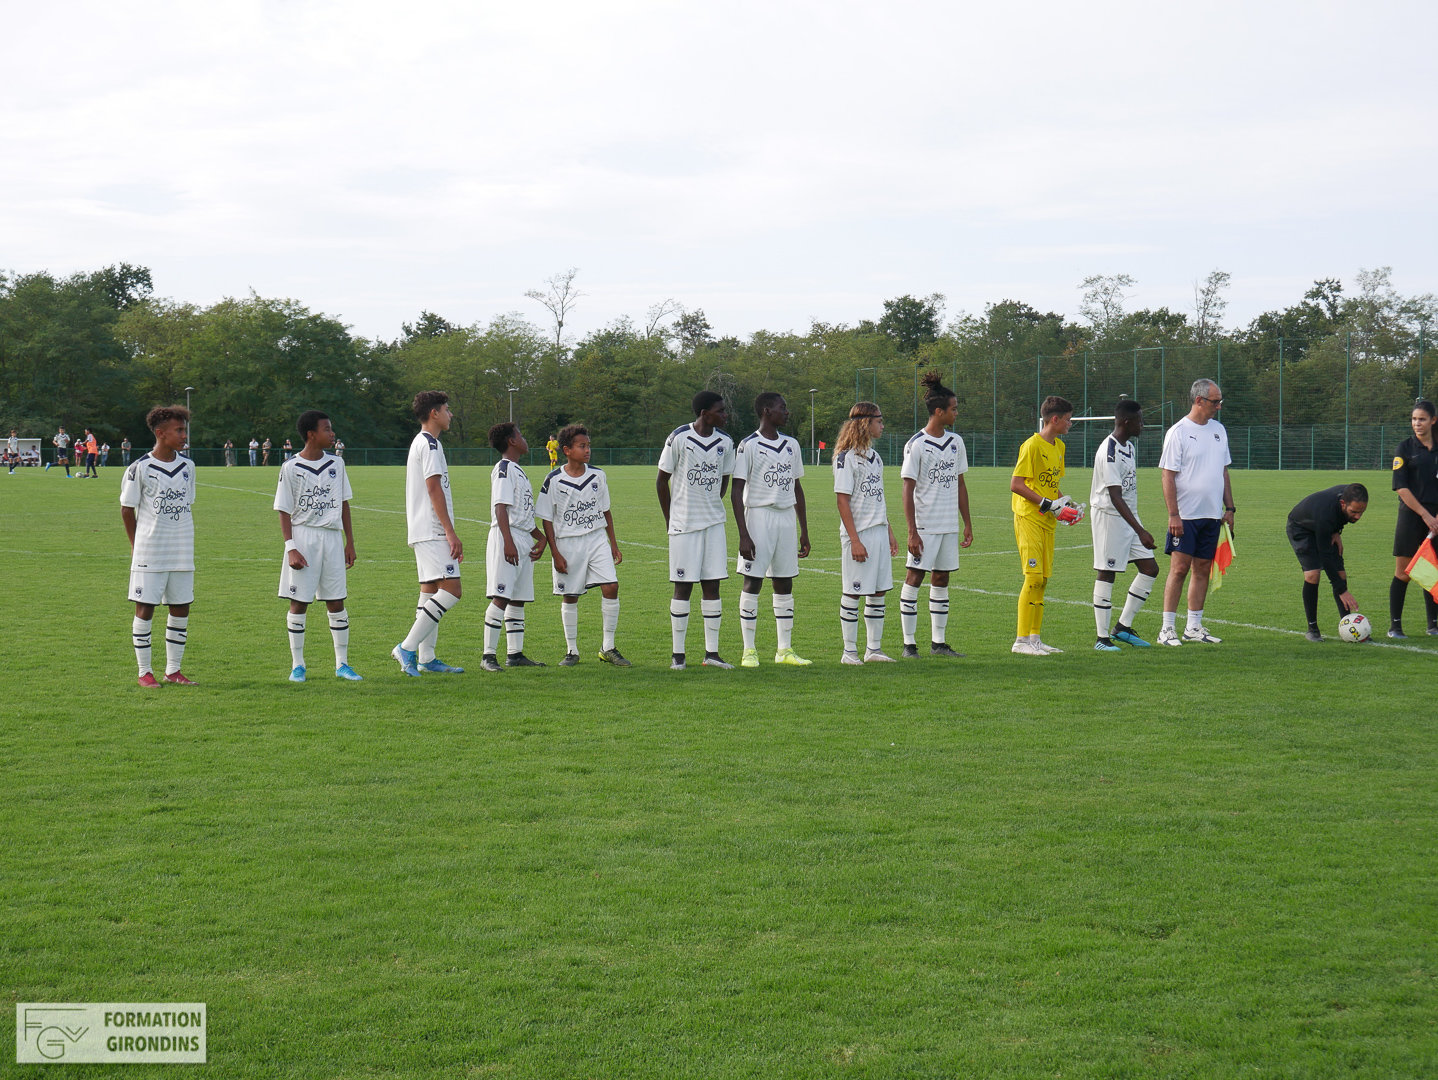 Cfa Girondins : Une double opposition amicale mitigée contre Toulouse - Formation Girondins 